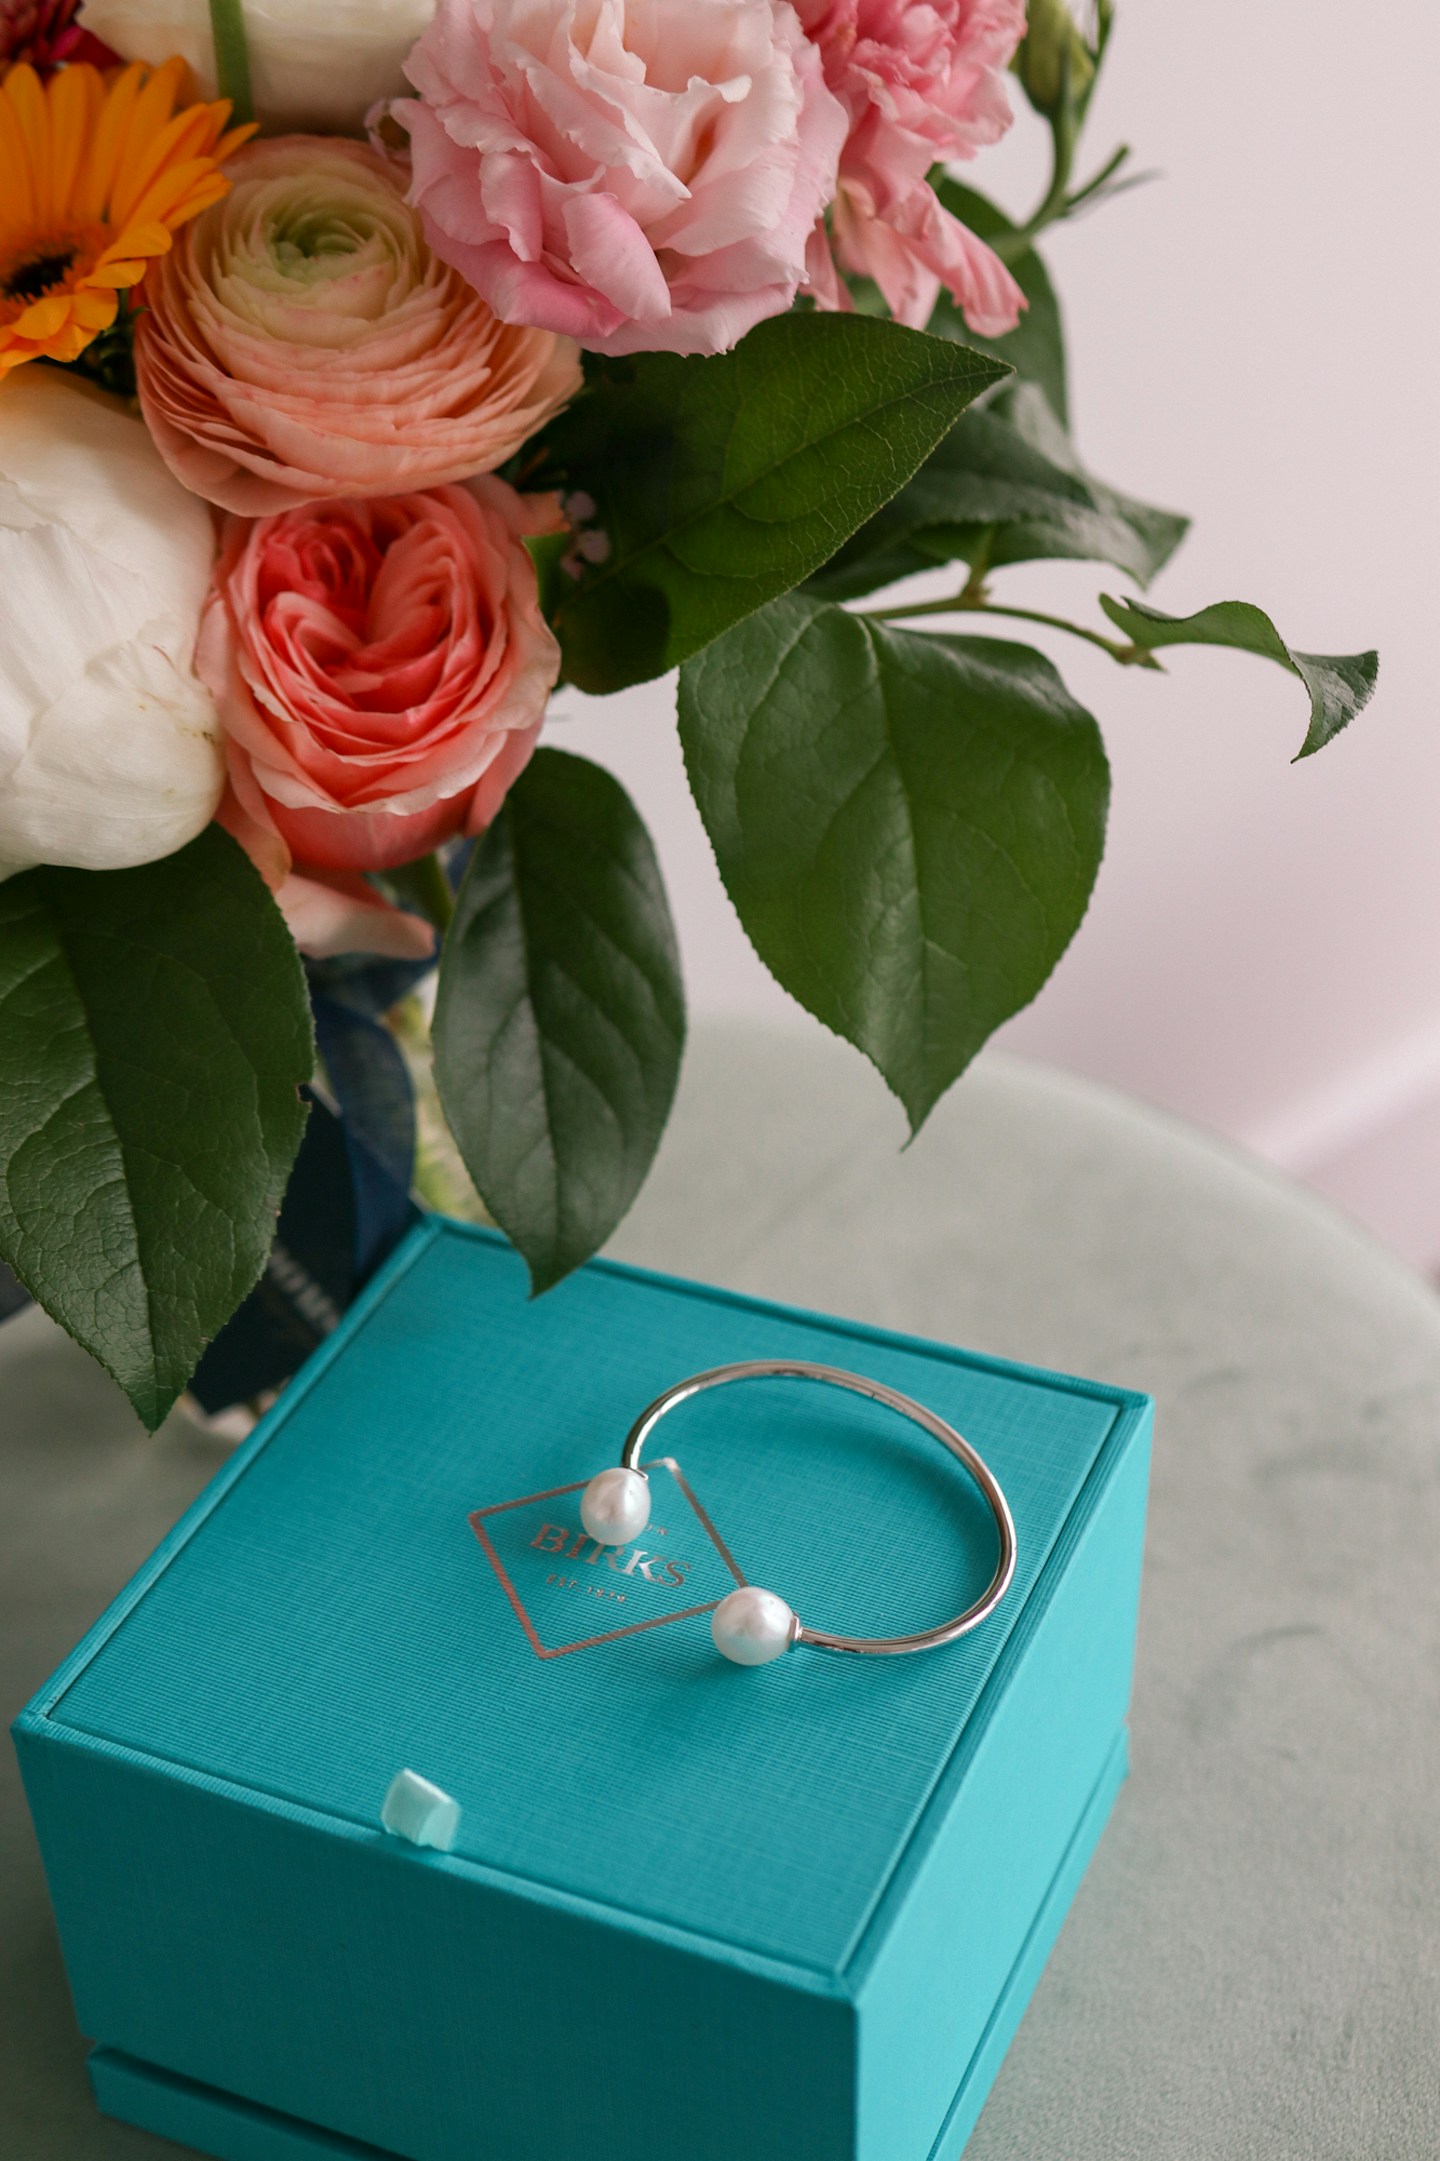 Gift Ideas for Law Students and New Lawyers: I've rounded up some of my favourite, timeless gift ideas for the lawyers in your life or law students. From pearl jewelry to the best places to find suits - keep reading for some inspiration!